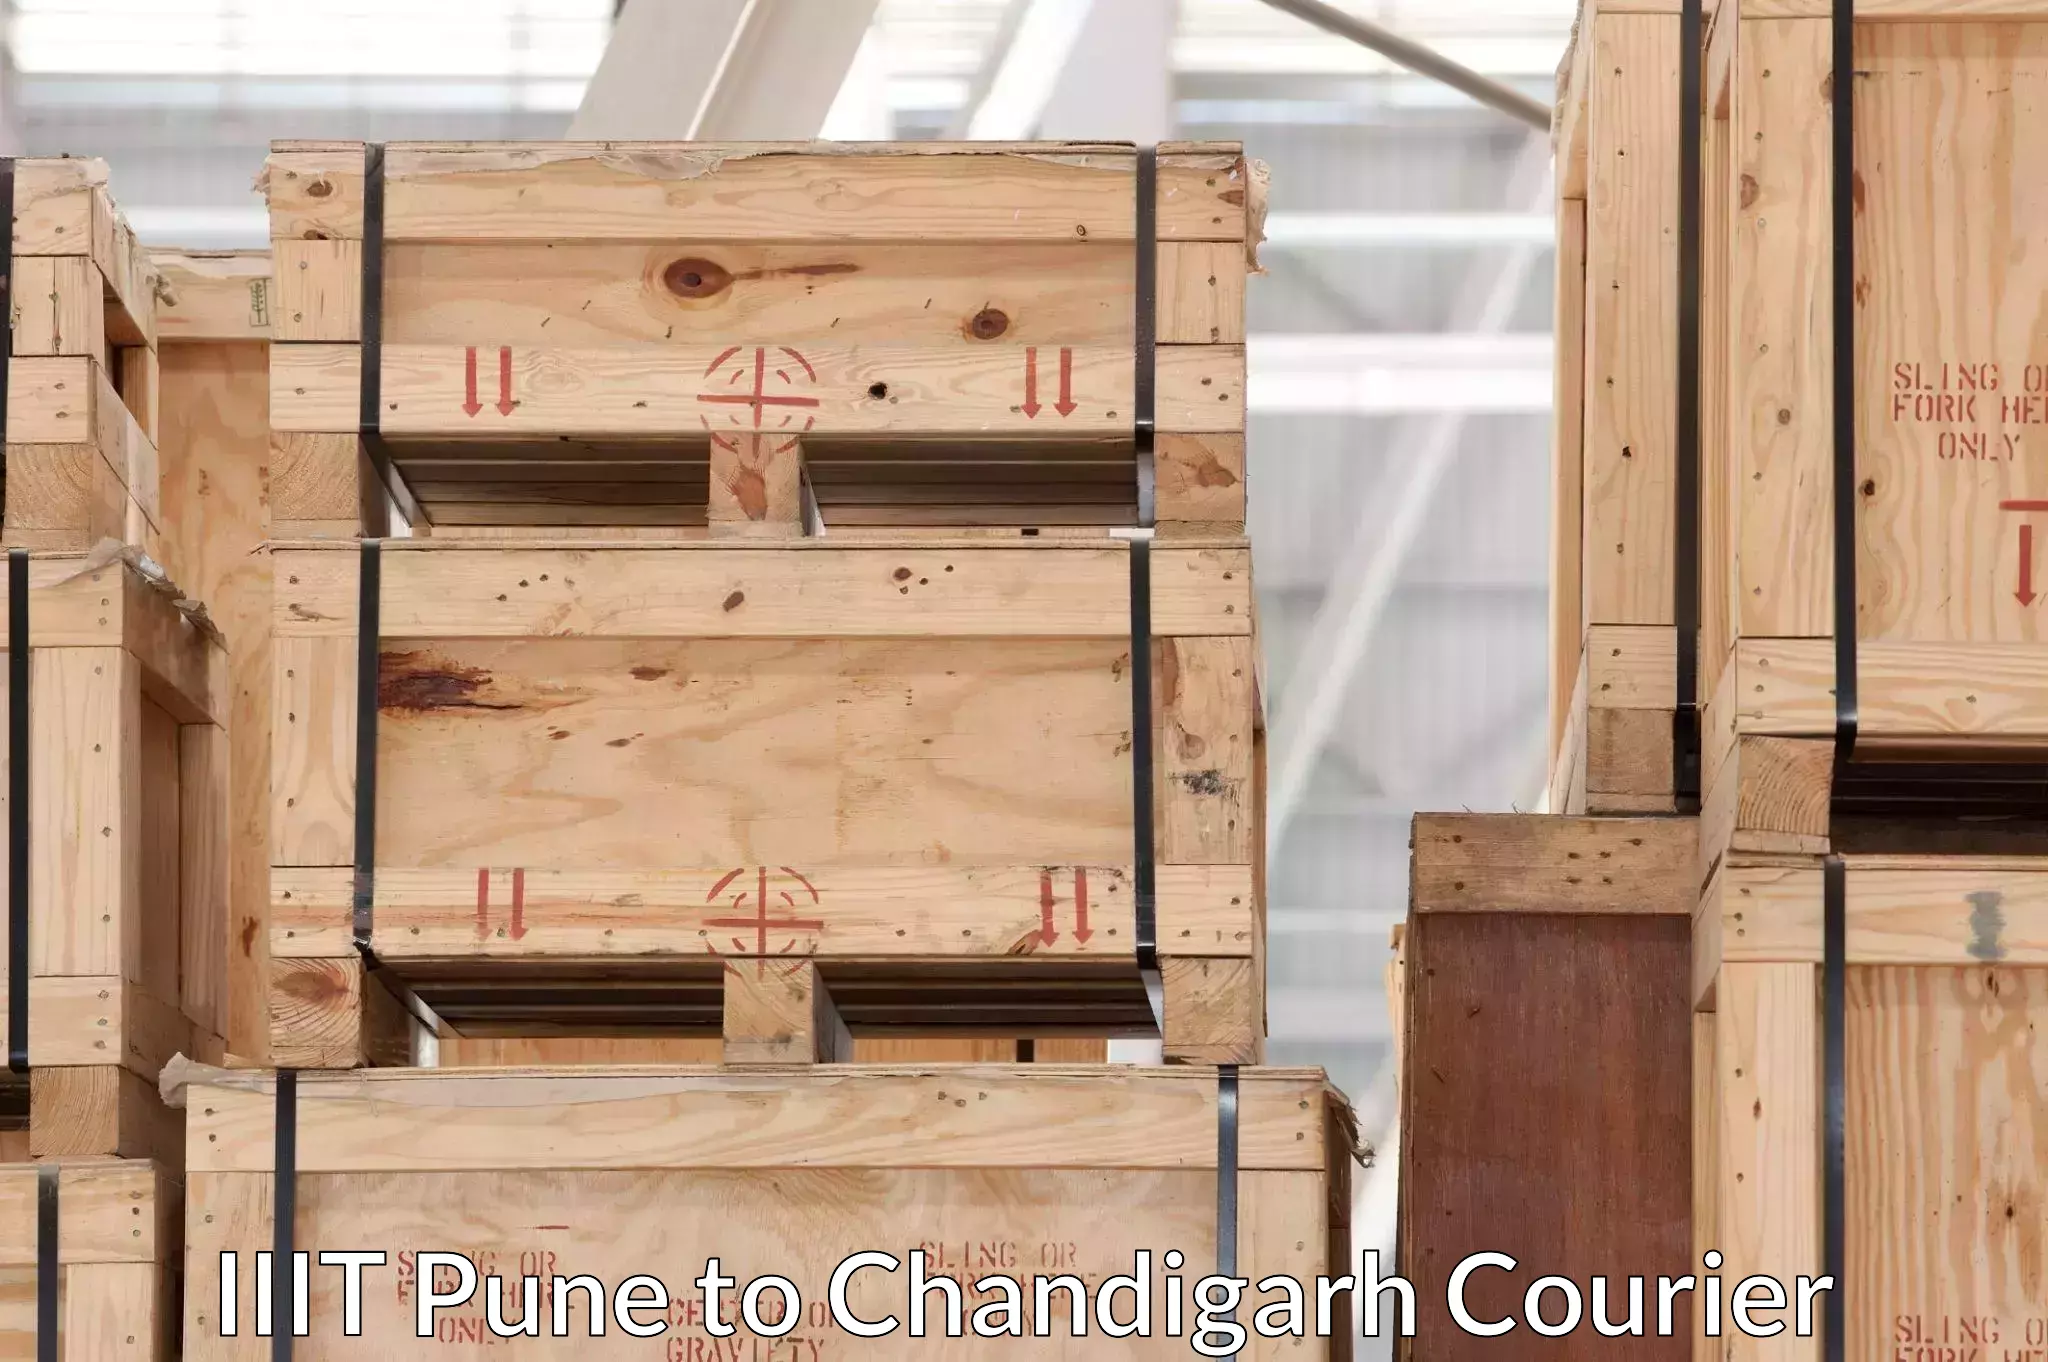 Moving and packing experts IIIT Pune to Panjab University Chandigarh